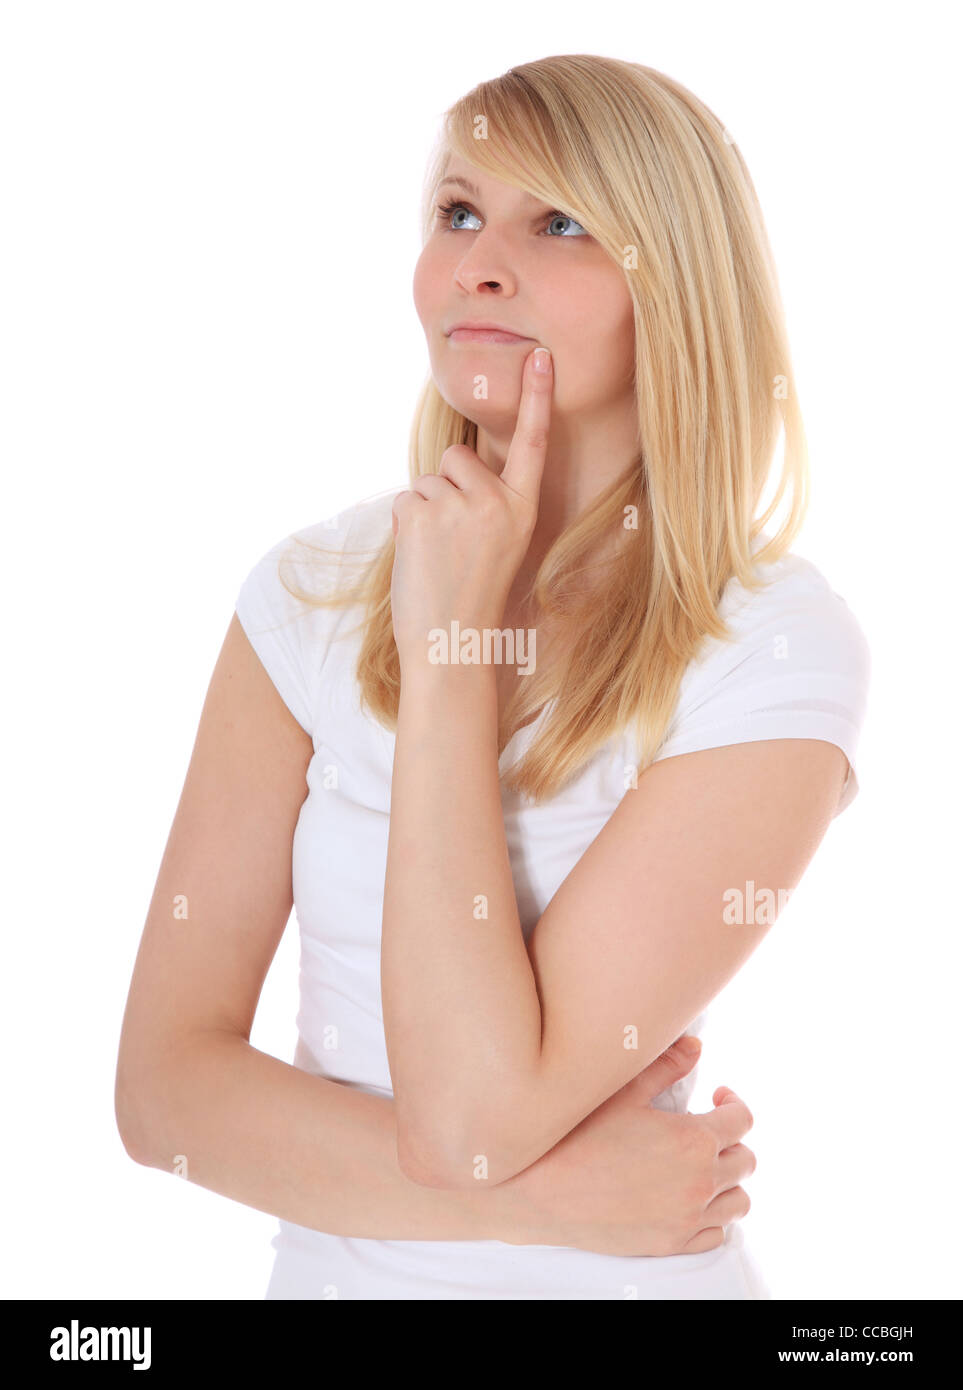 Teenage girl deliberates a decision. All on white background. Stock Photo